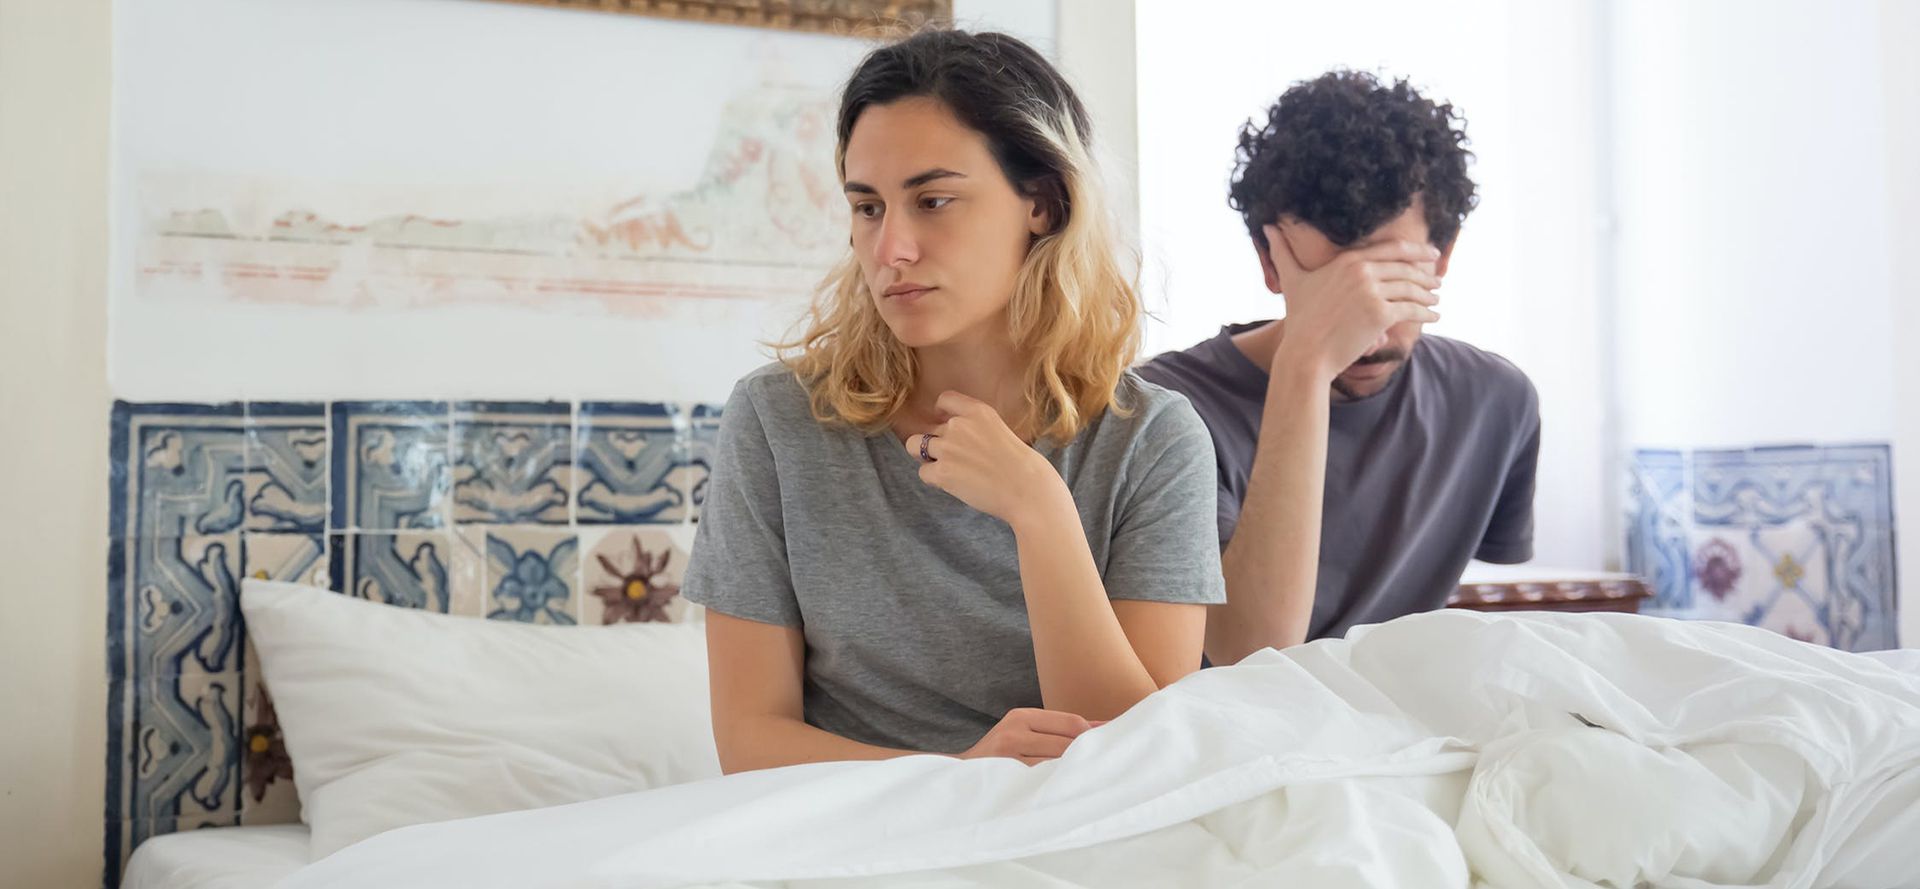 Woman break up with man on the bed.